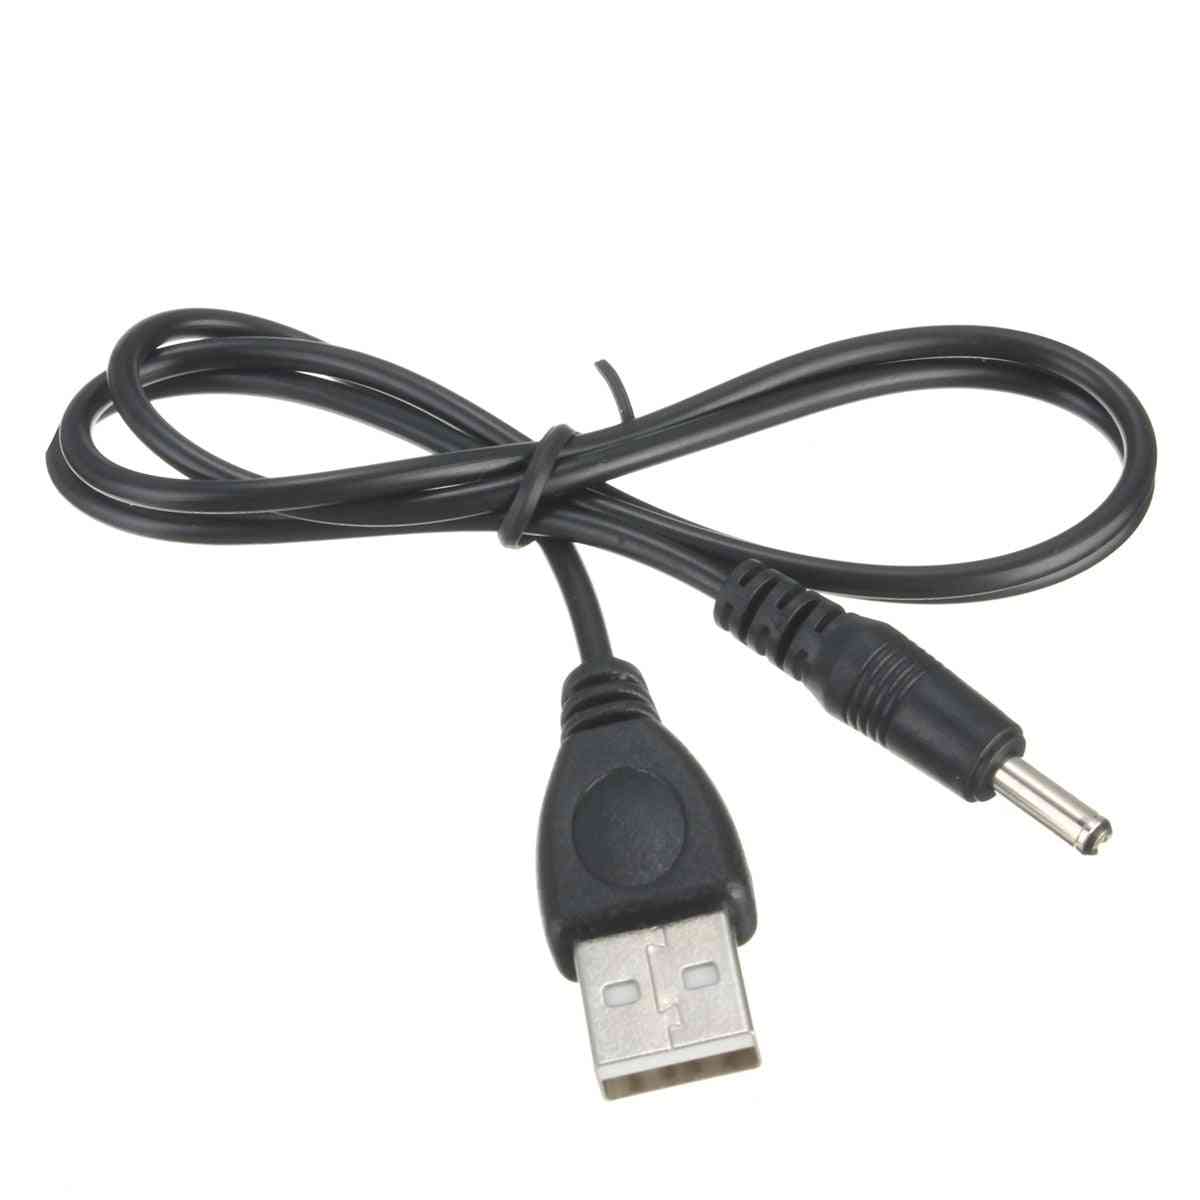 Universal Usb Charger Charging Cable